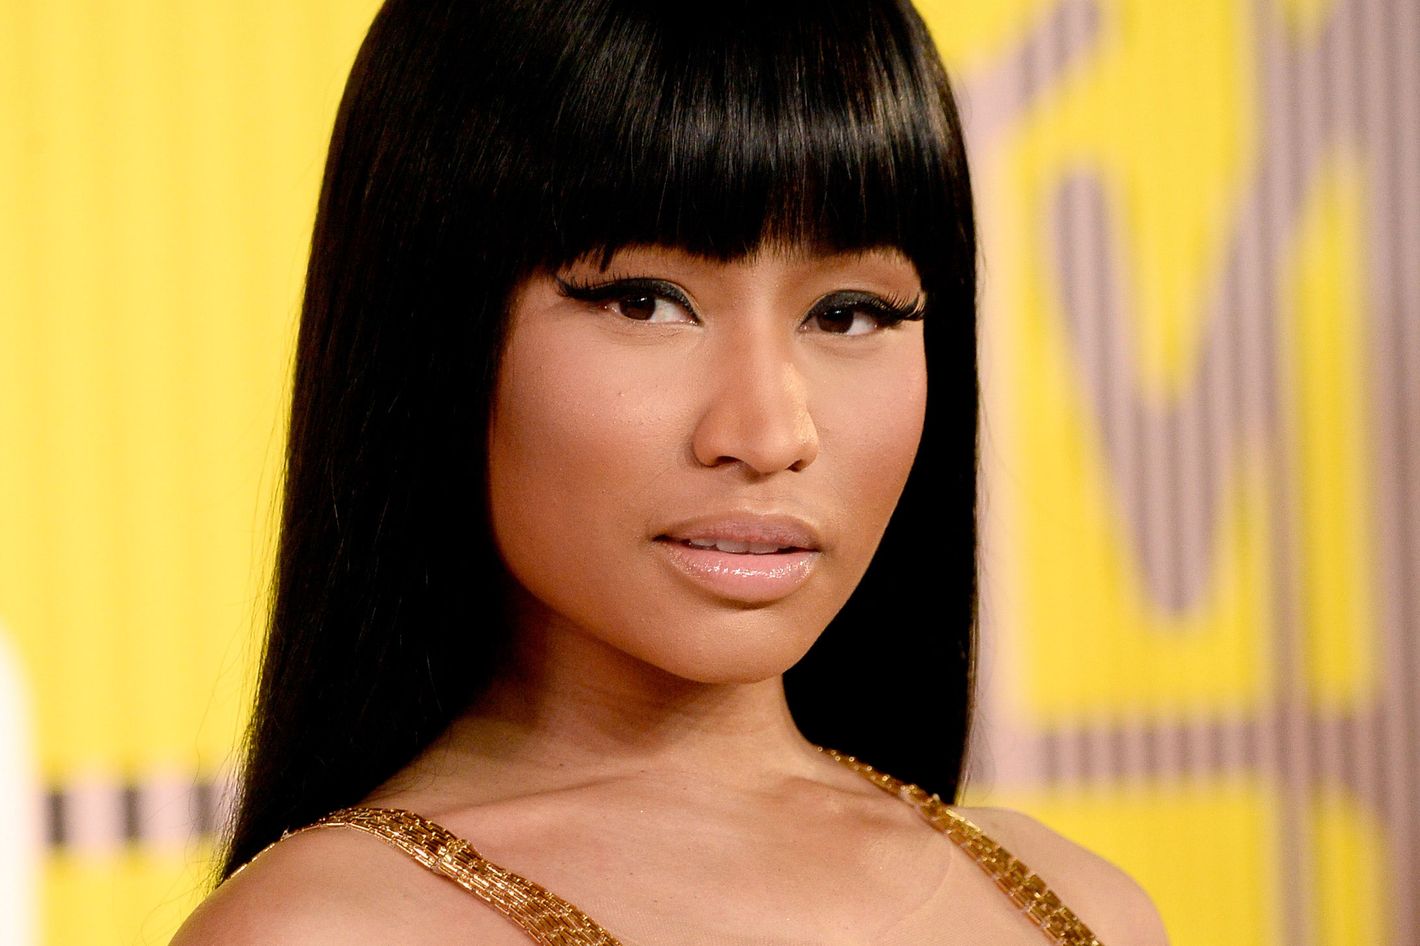 Nicki Minaj Gets Real About Her Politics in New Interview